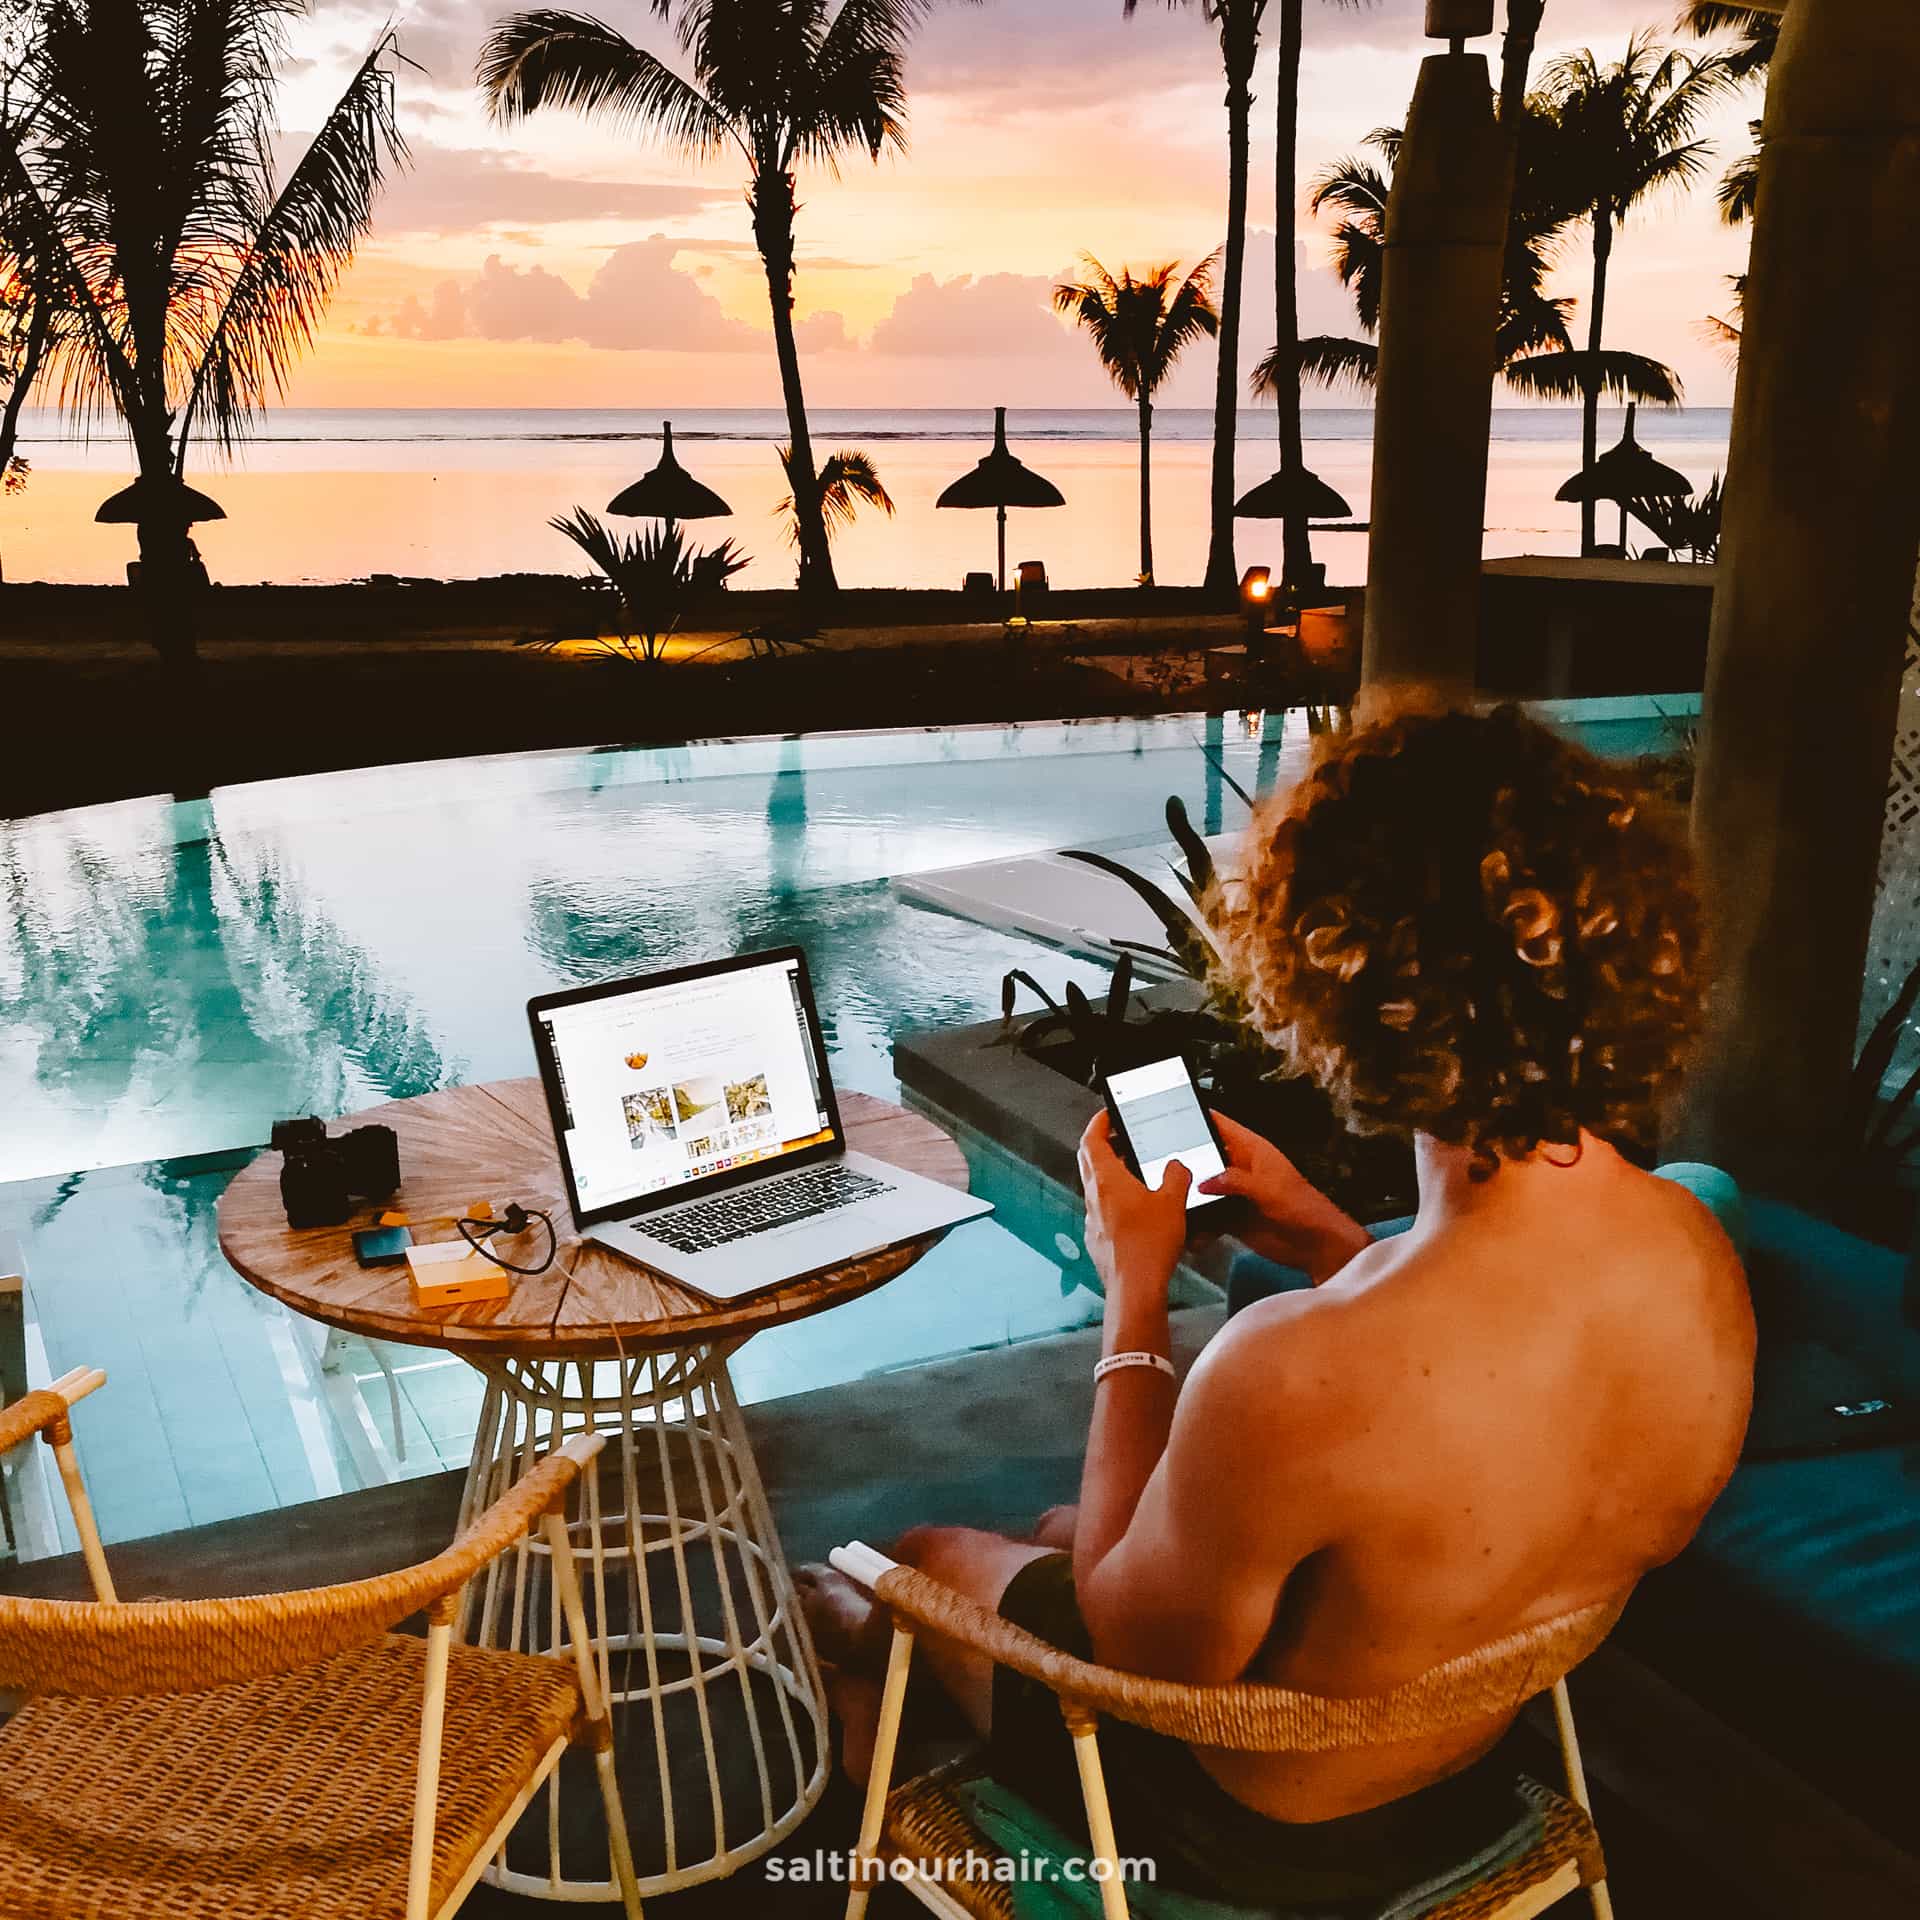 How to a Digital Nomad Travel & Make Money (Beginner's Guide)